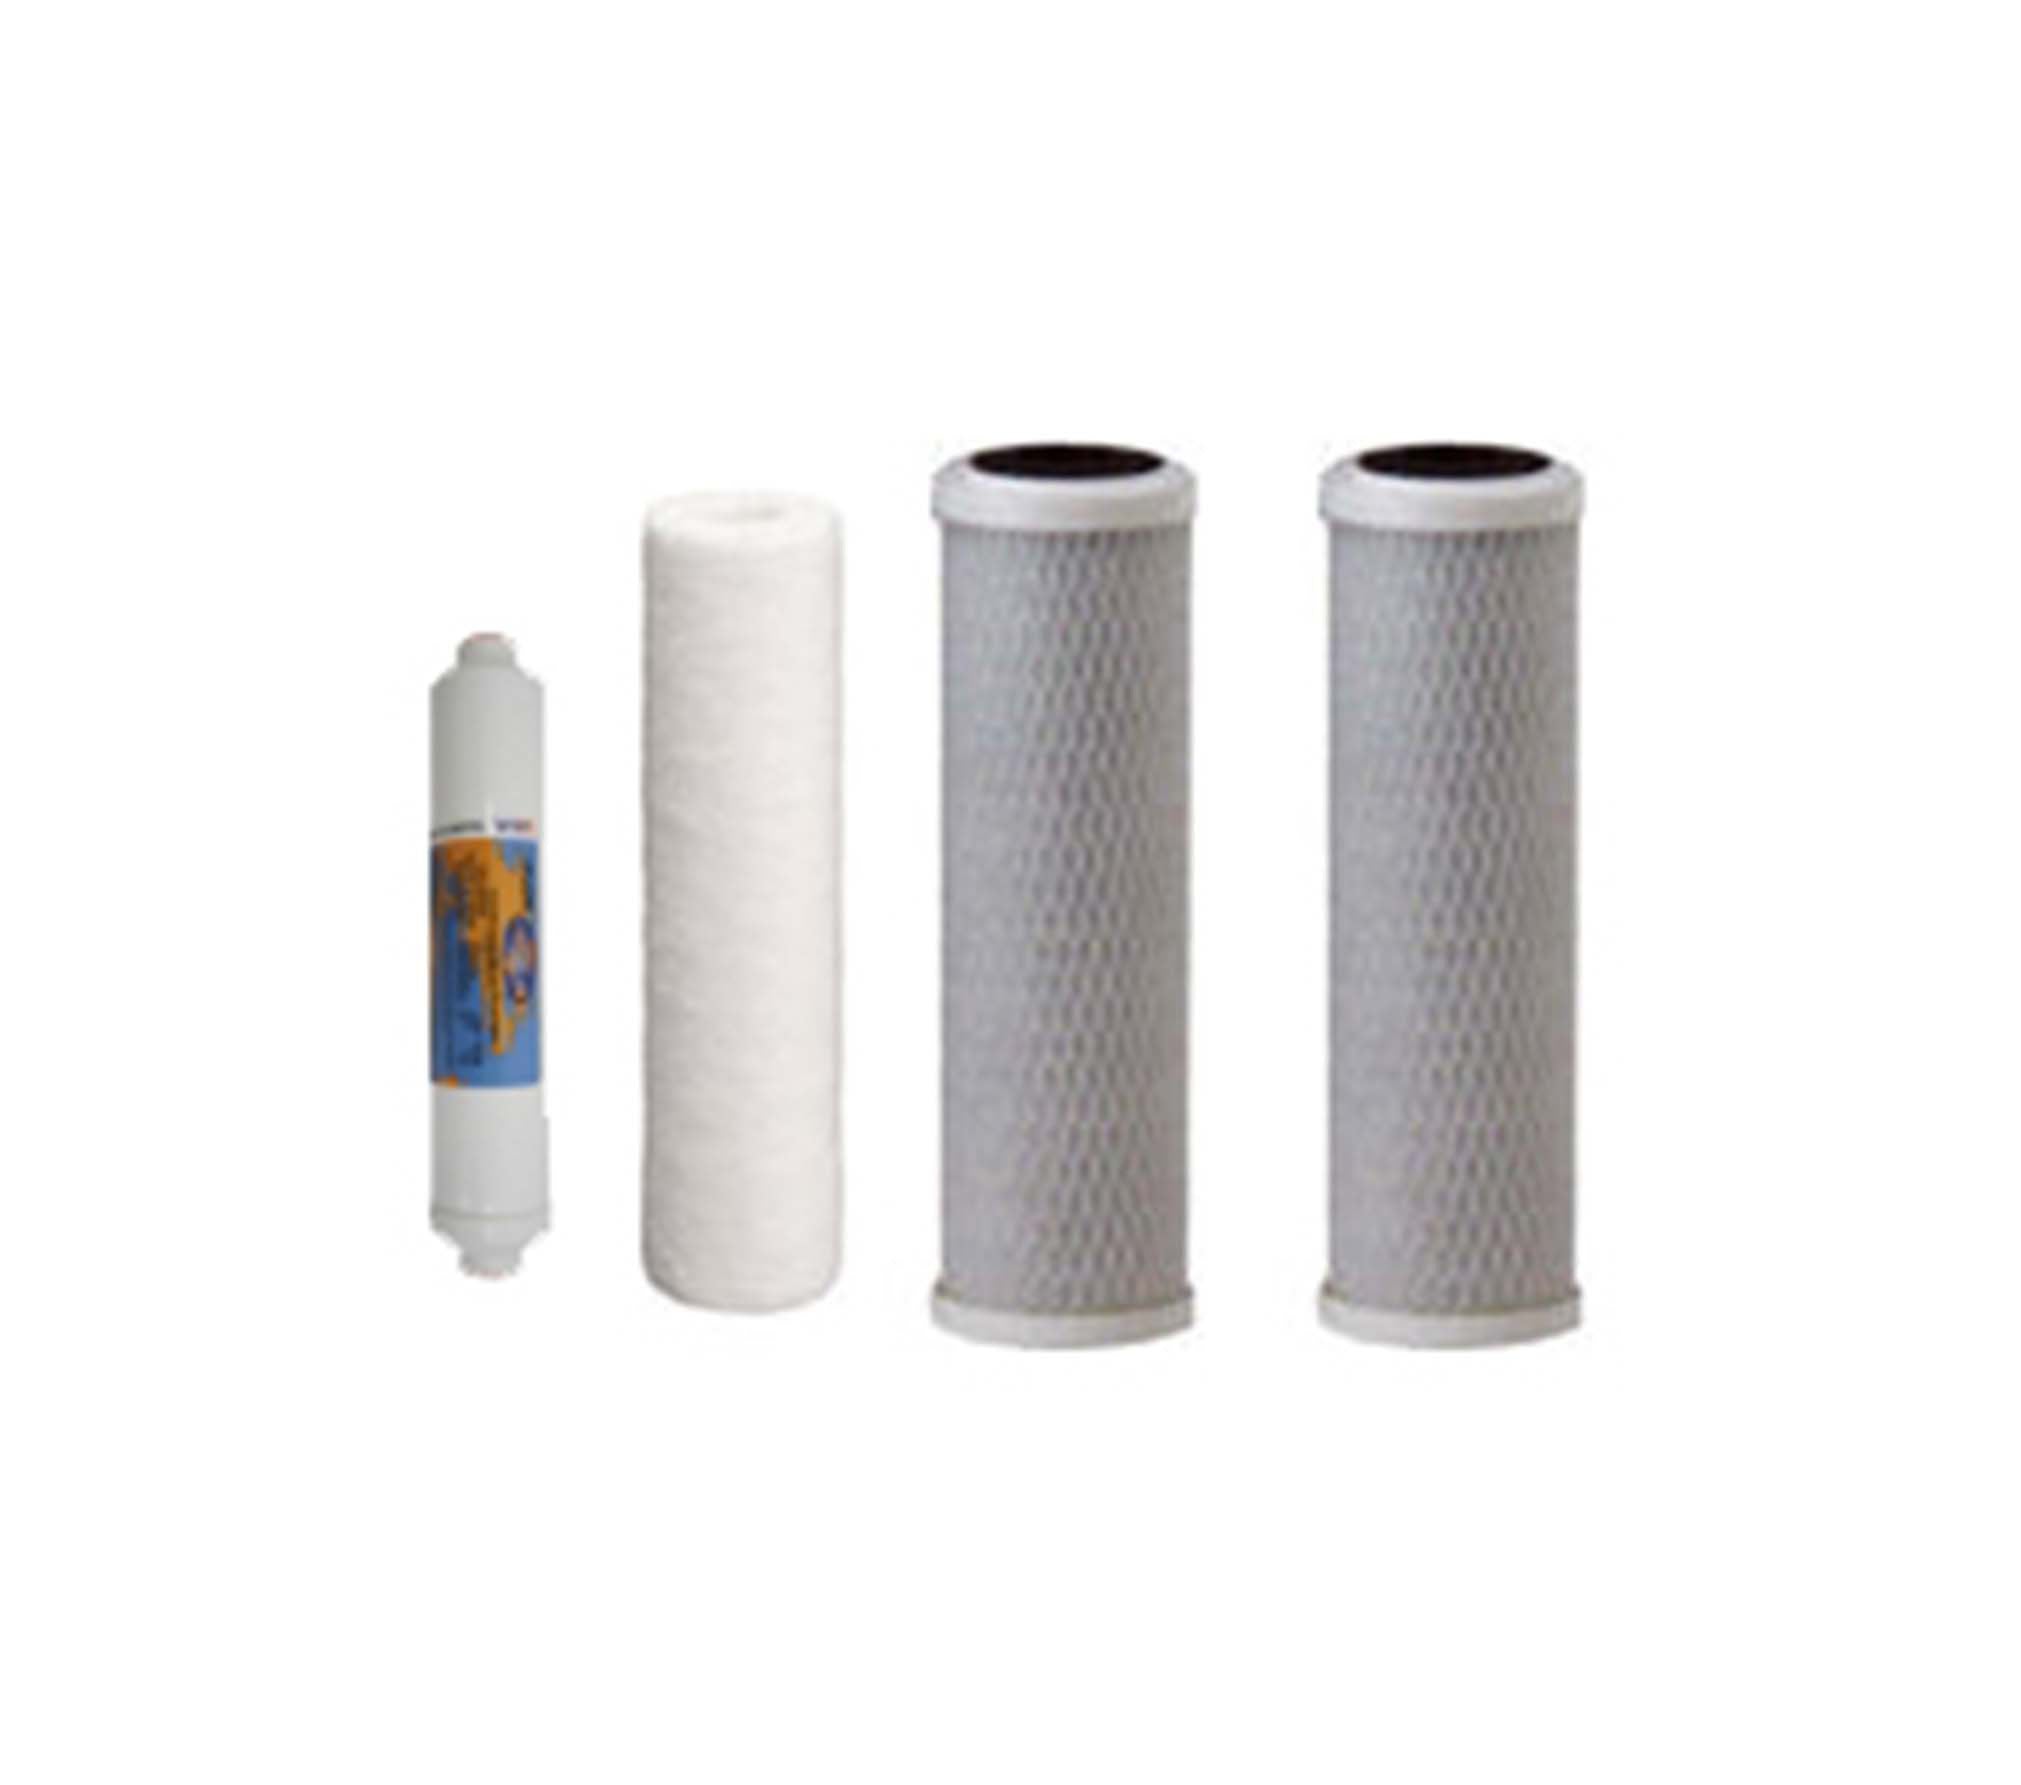 Clean World Water Filters | CWW-5T Filters | Clean World Water Filter